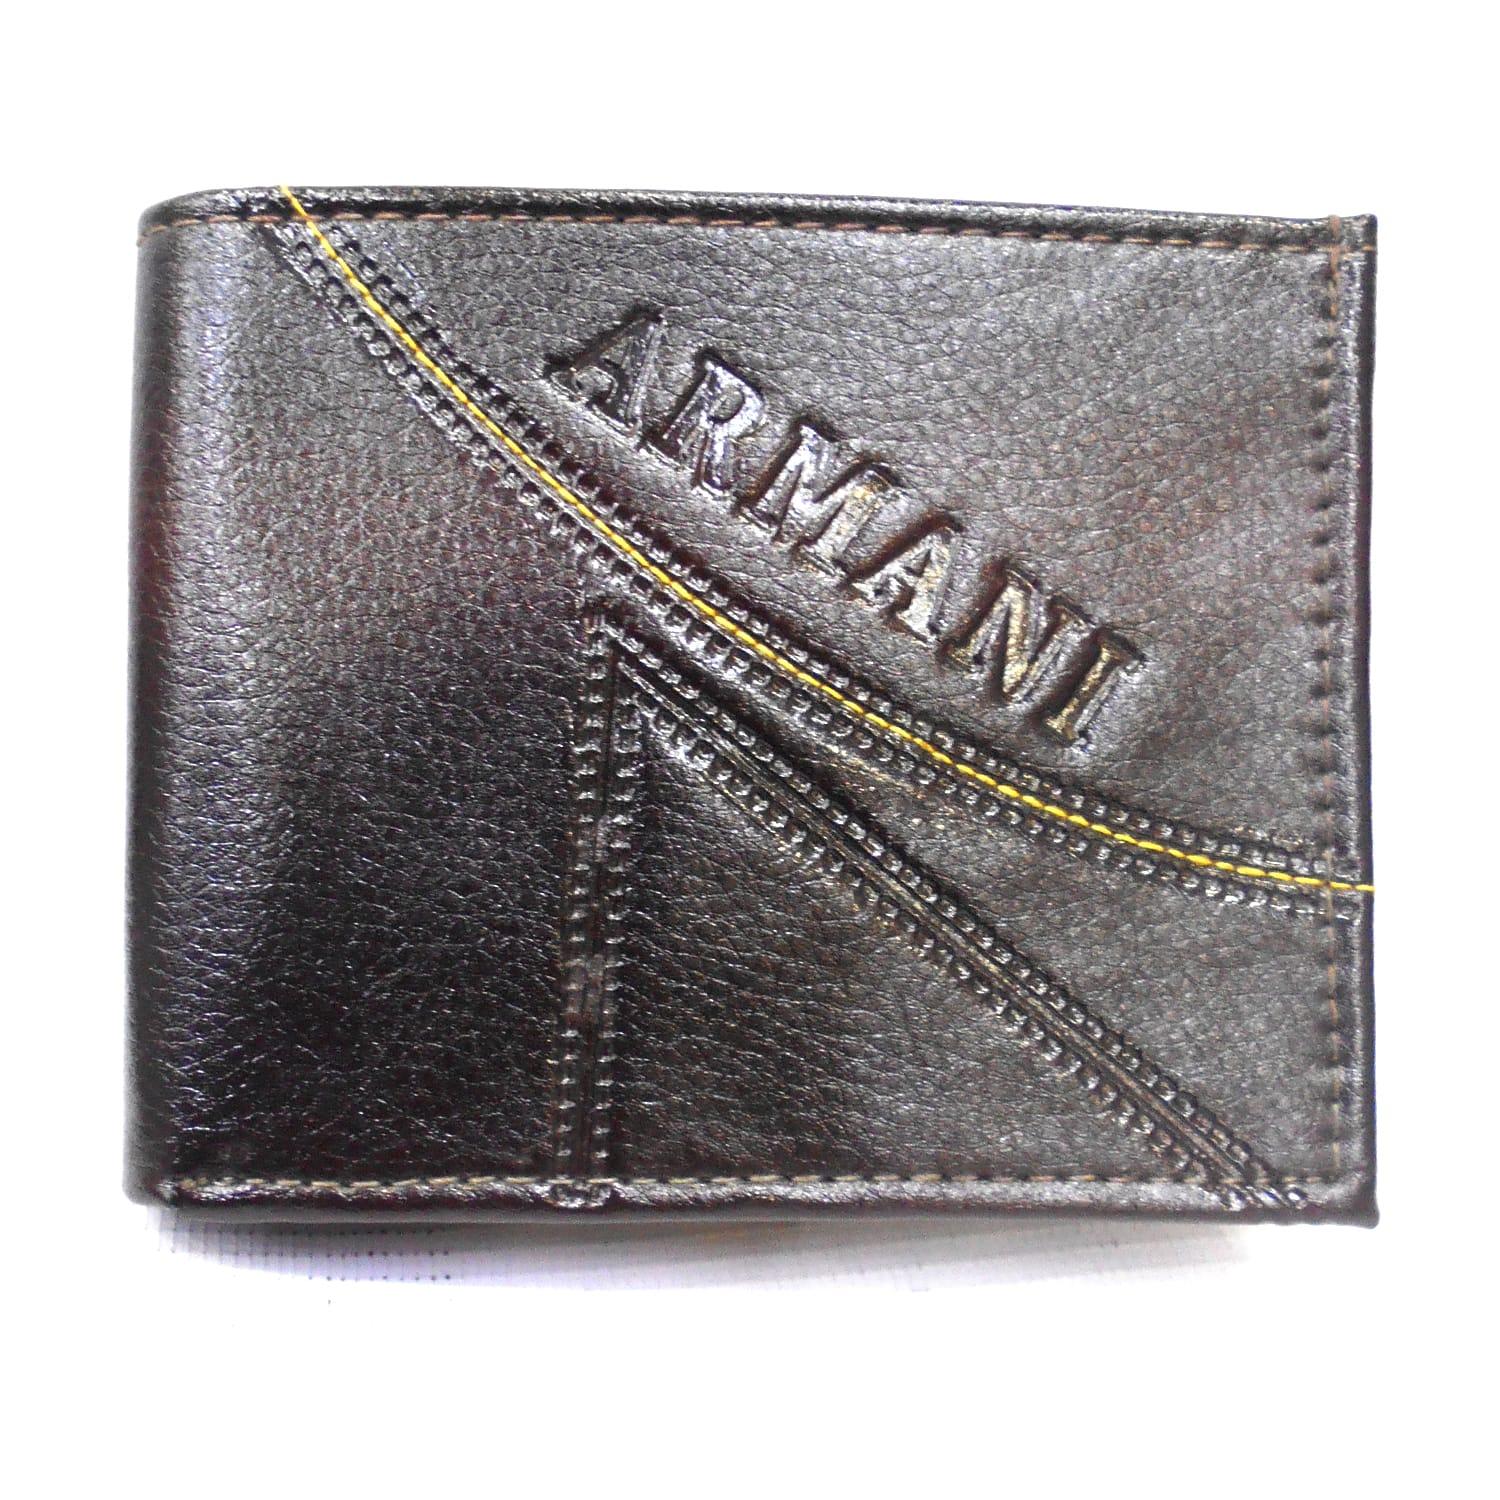 armani official online store